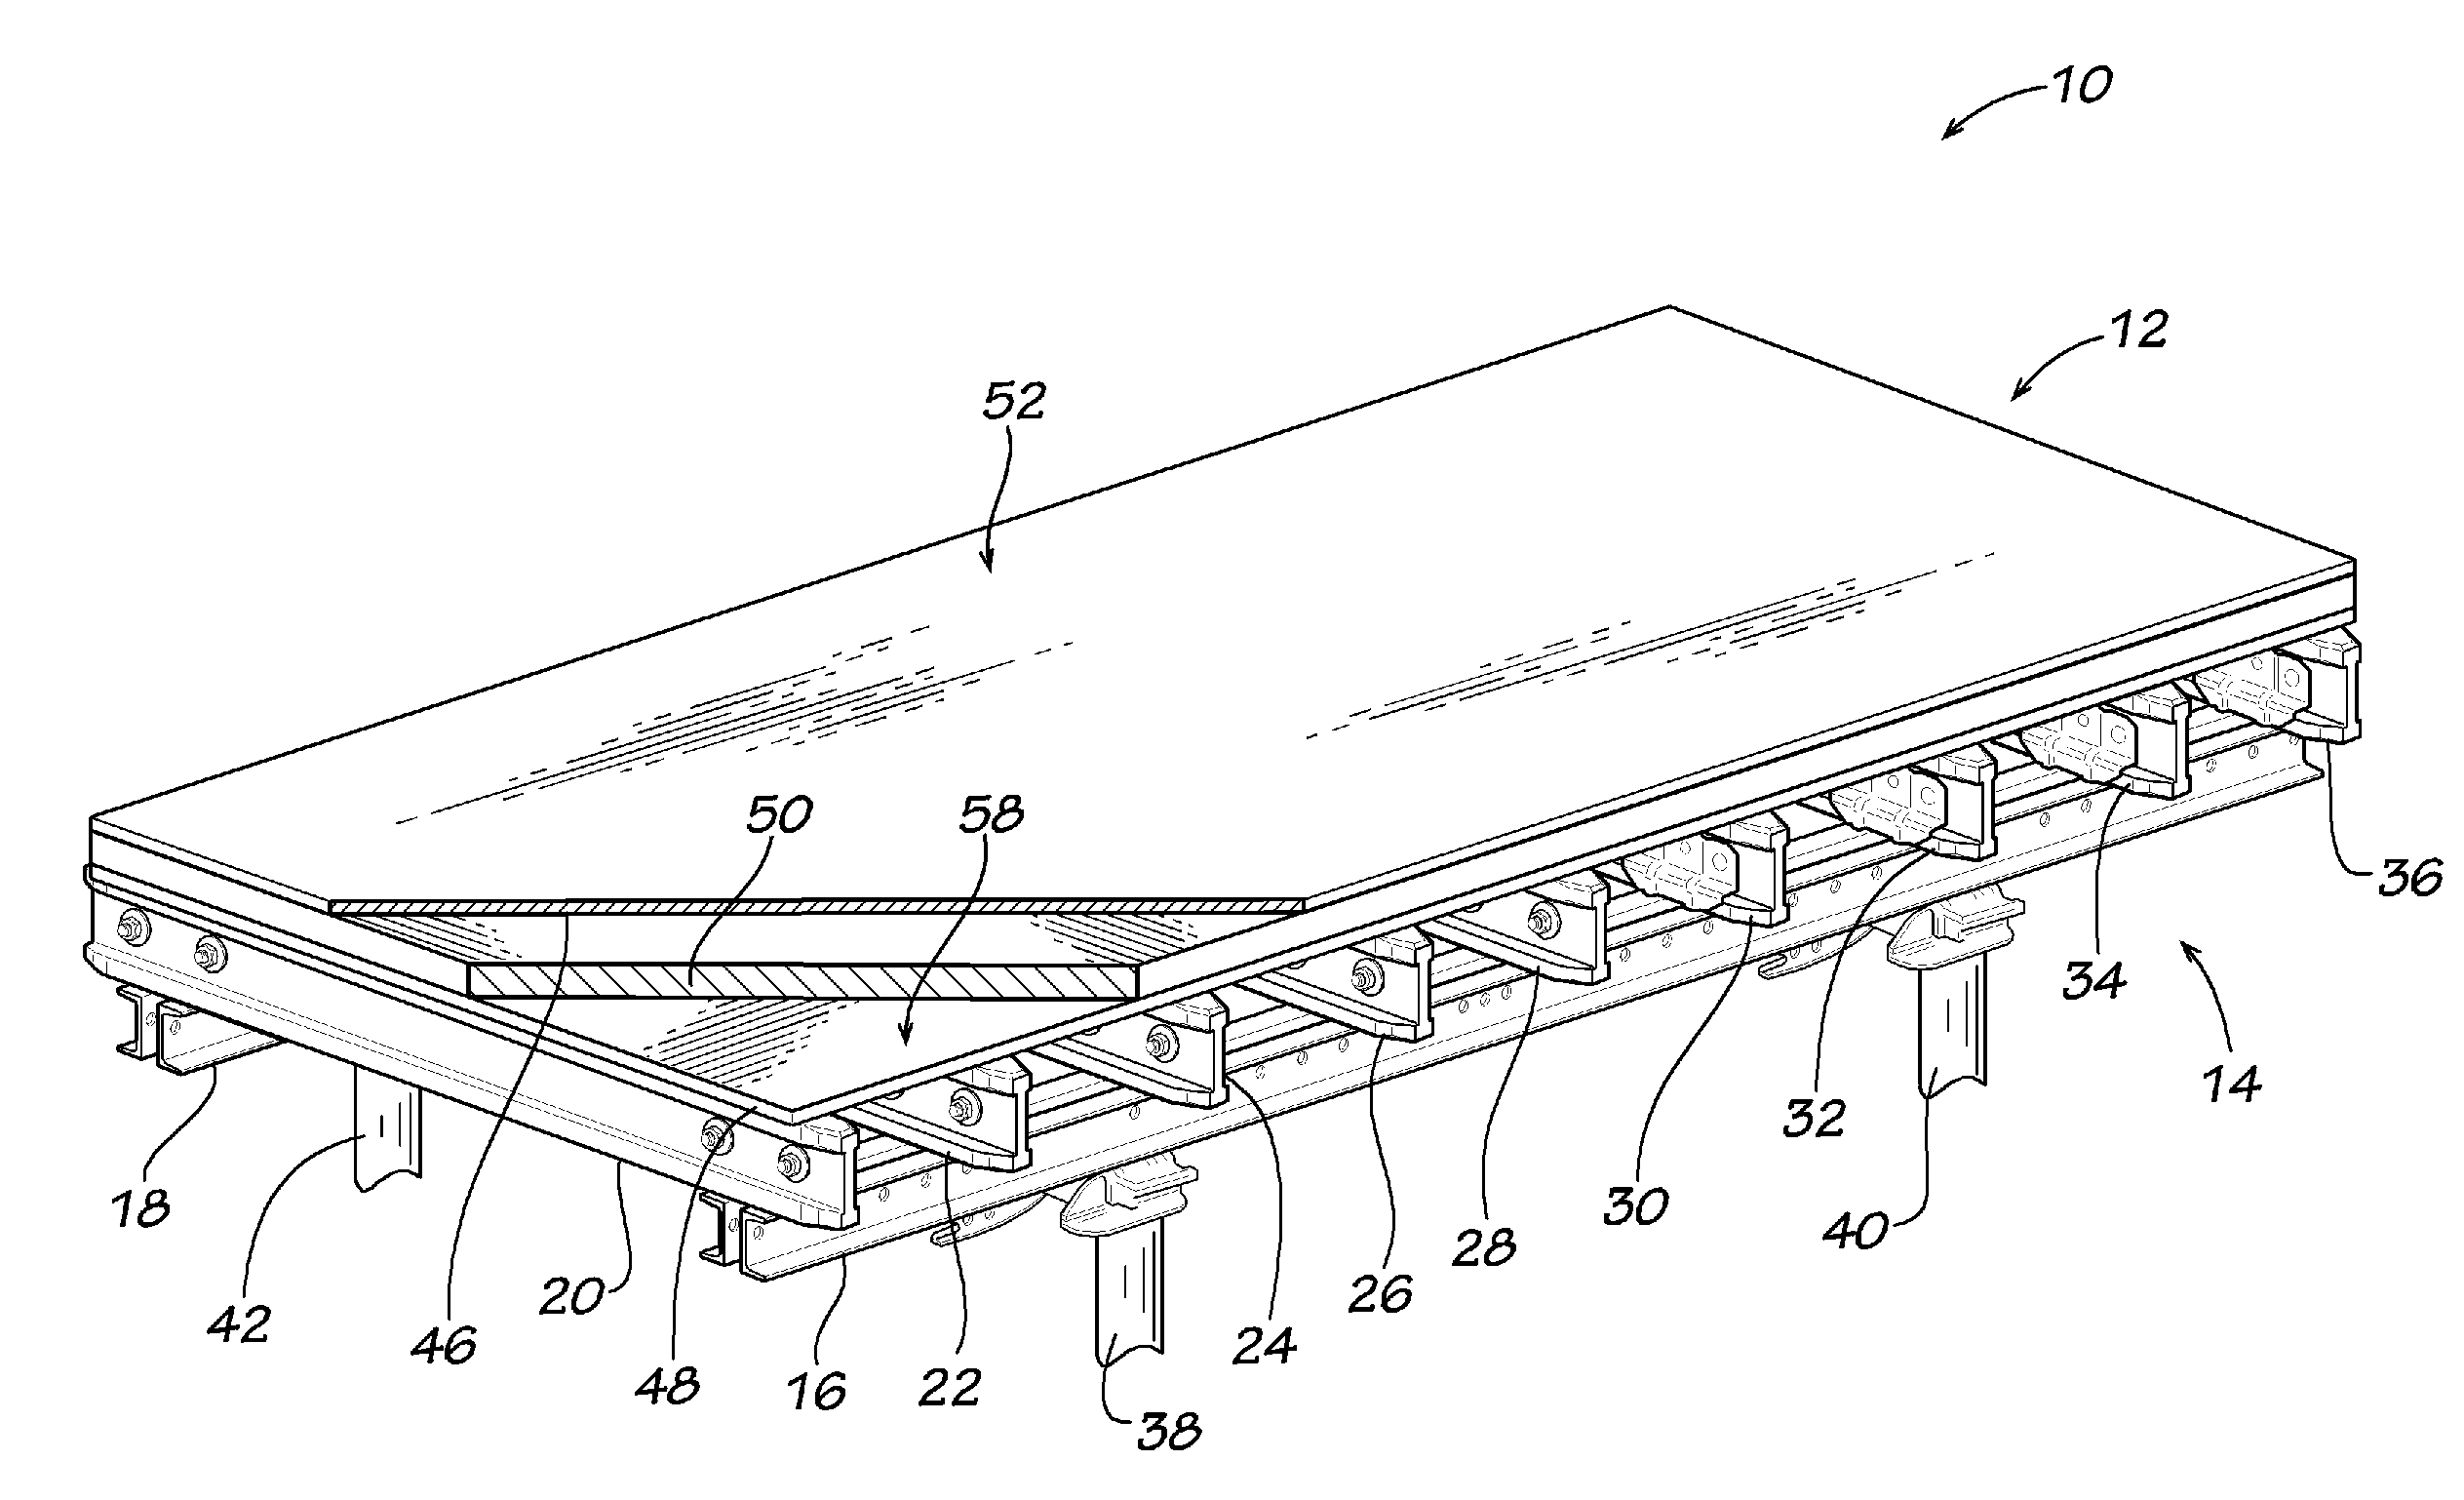 Insulated flying table concrete form, electrically heated flying table concrete form and method of accelerating concrete curing using same